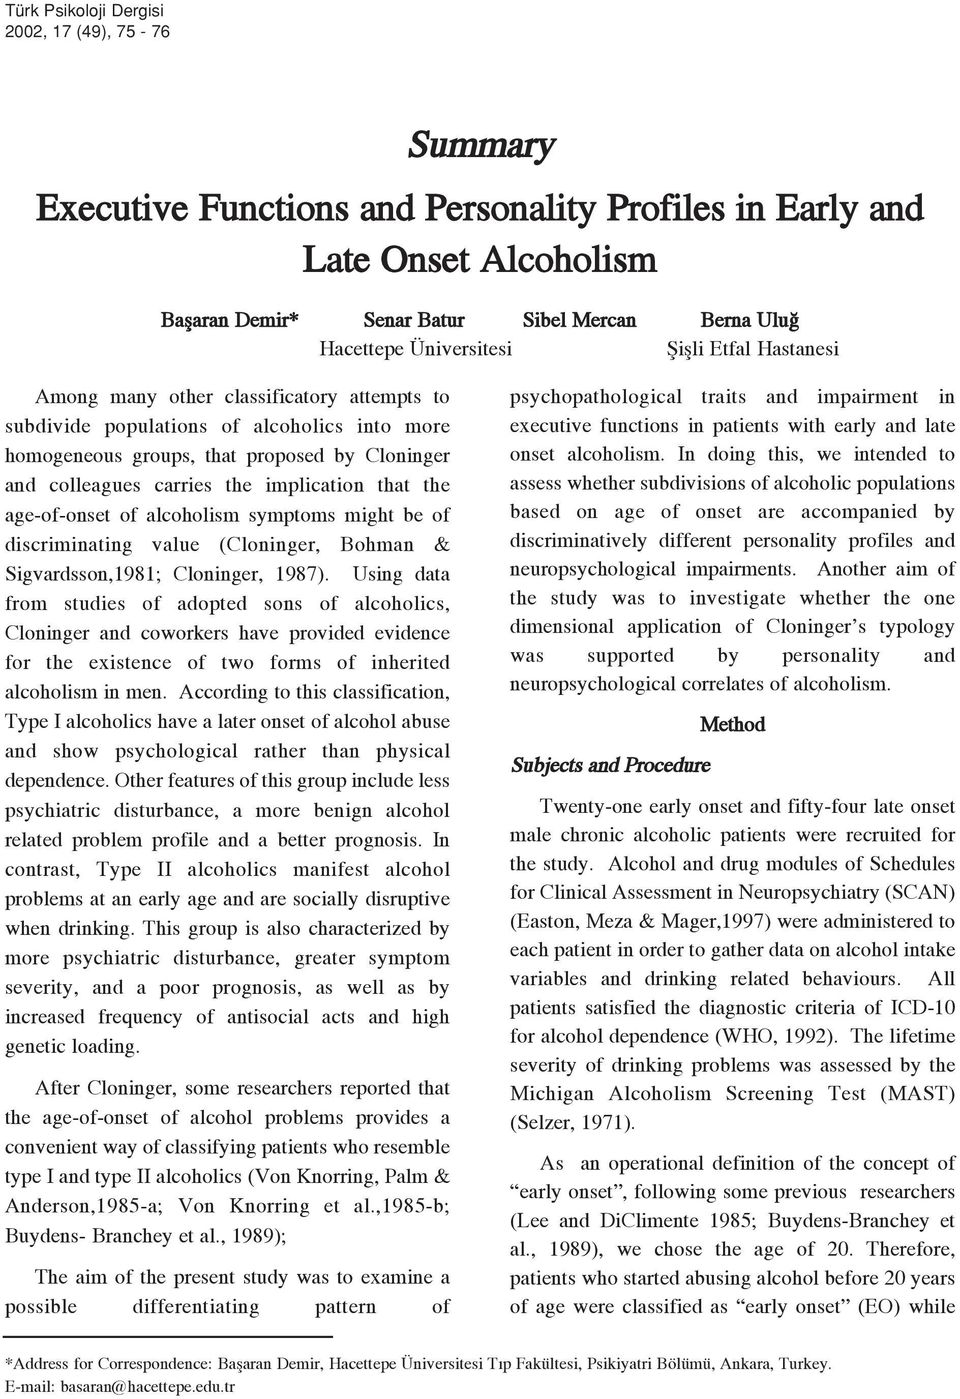 the implication that the age-of-onset of alcoholism symptoms might be of discriminating value (Cloninger, Bohman & Sigvardsson,1981; Cloninger, 1987).